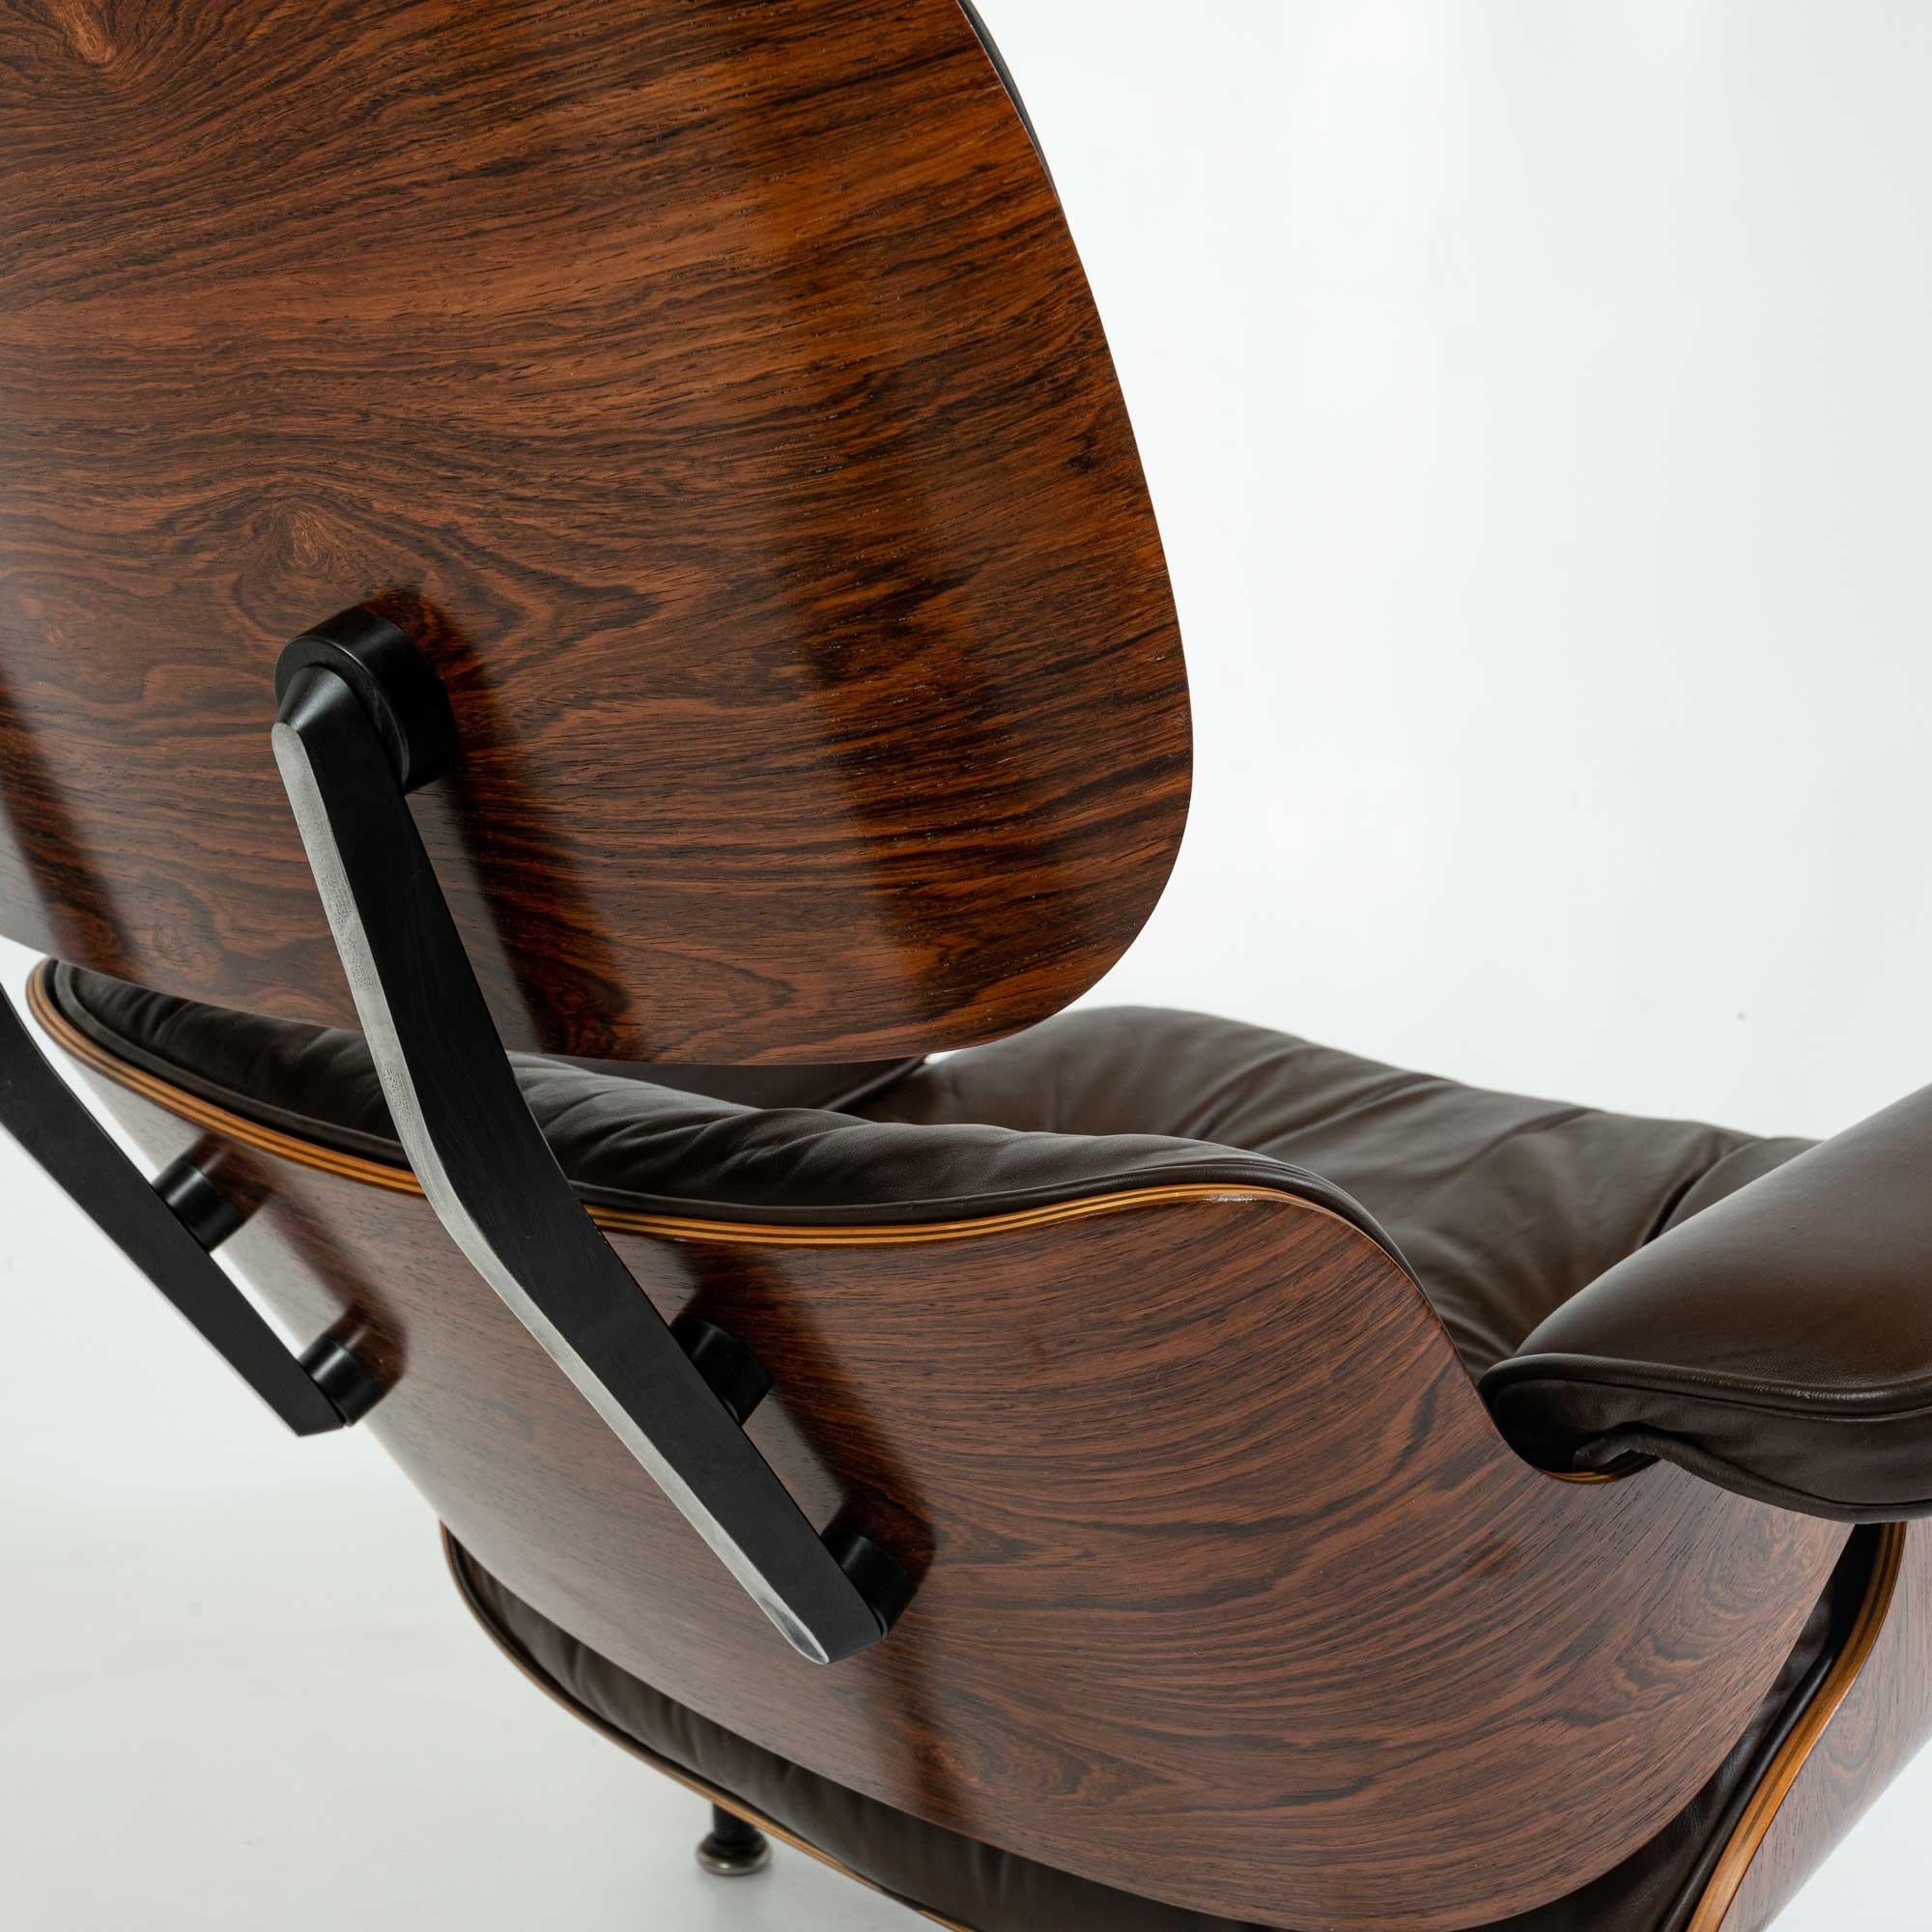 3rd Gen Eames Lounge Chair 670-671 in Original Chocolate Leather For Sale 2